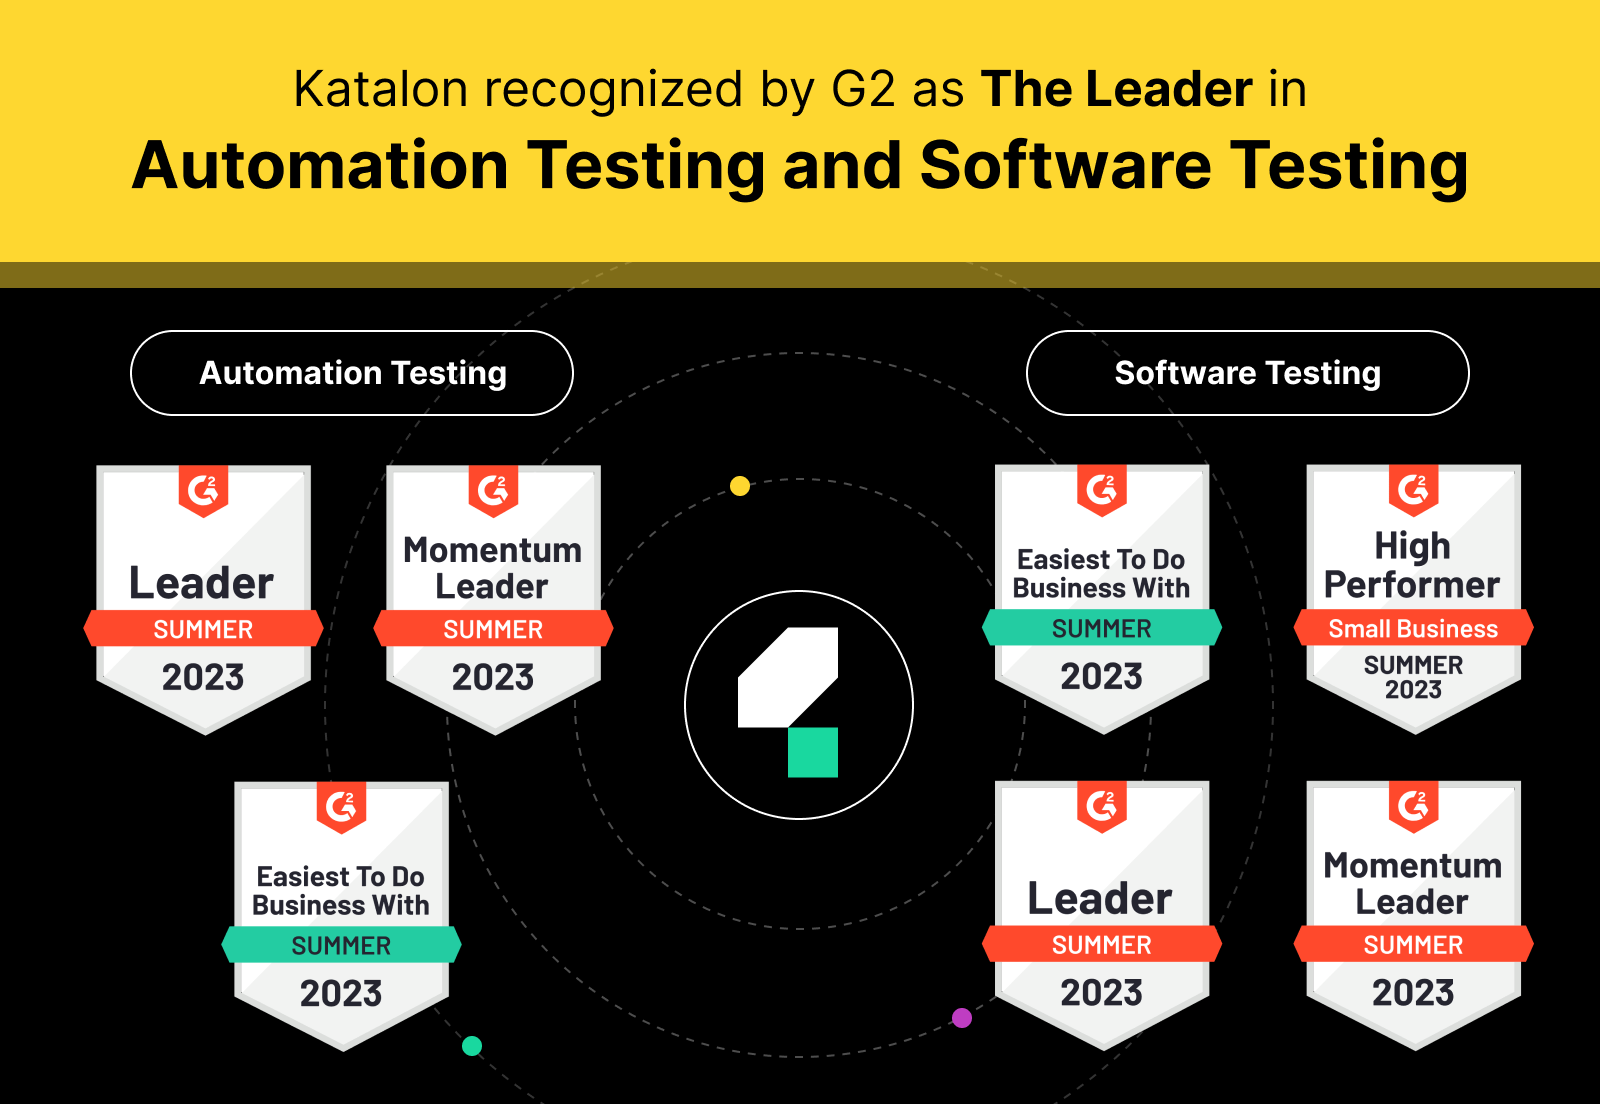 Katalon recognized by G2 as The Leader in Automation Testing and Software Testing